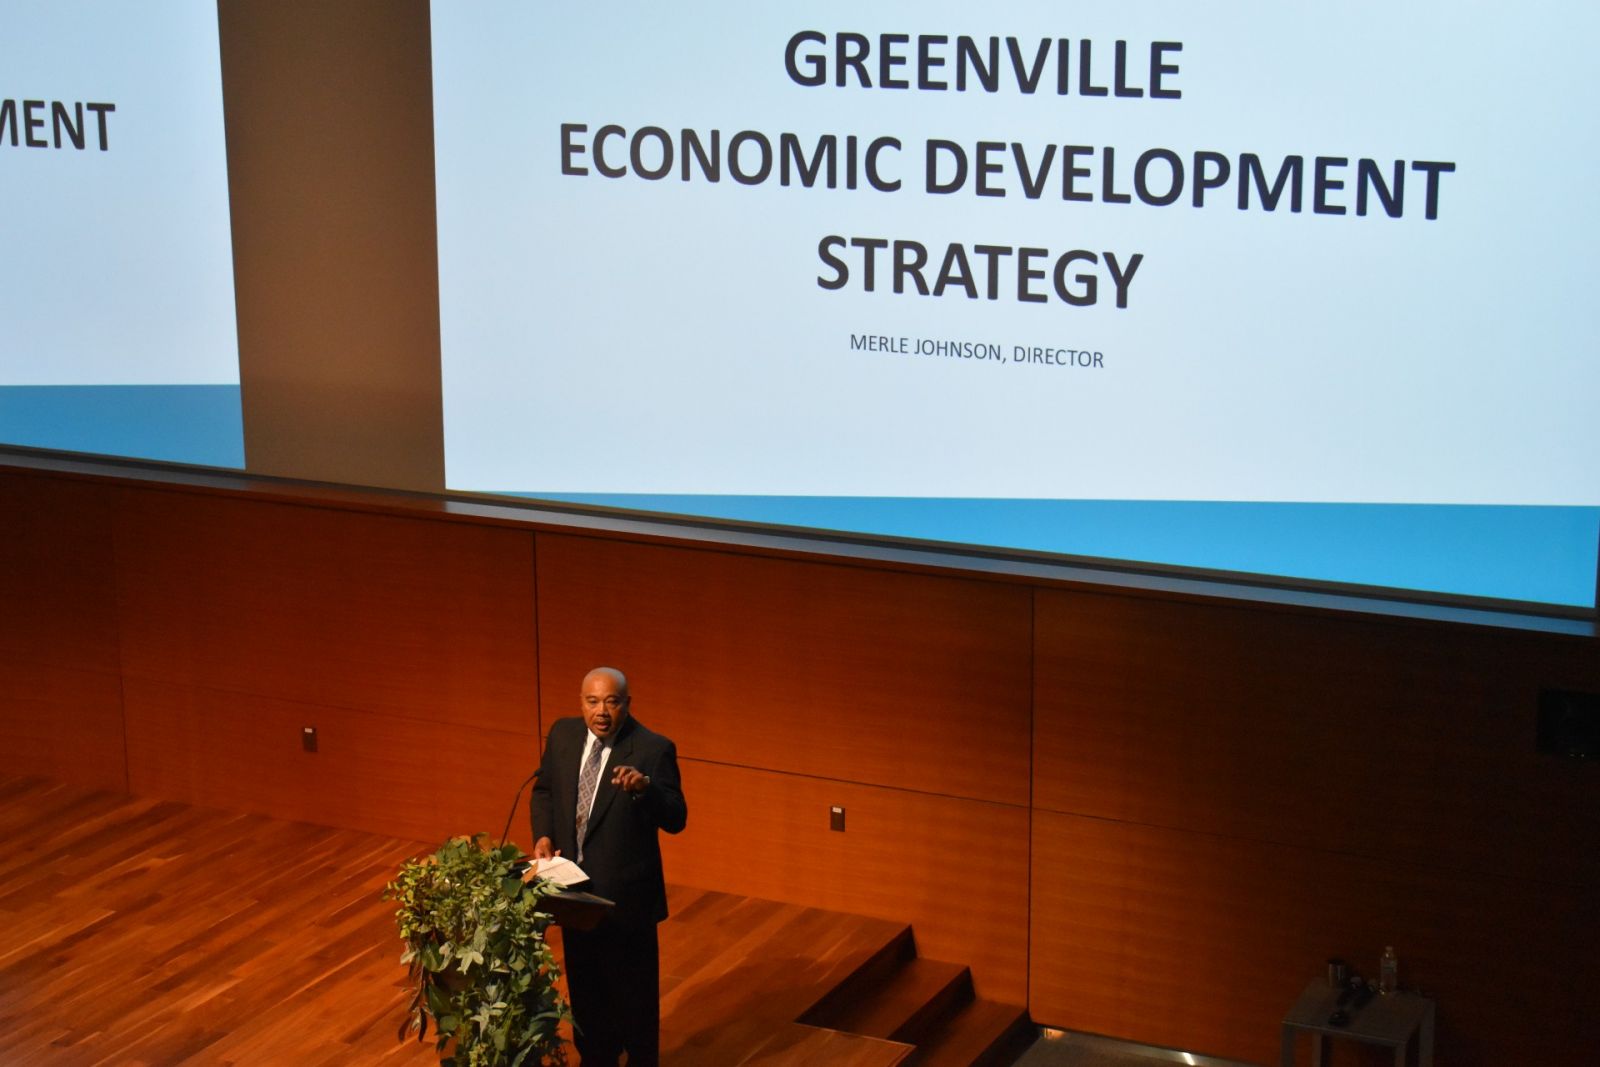 Merle Johnson, city of Greenville's economic development director, was born in Seoul, Korea and found his way into the Upstate via Charleston, where he served as director of operations at the Charleston County Economic Development Department. (Photo/Molly Hulsey)